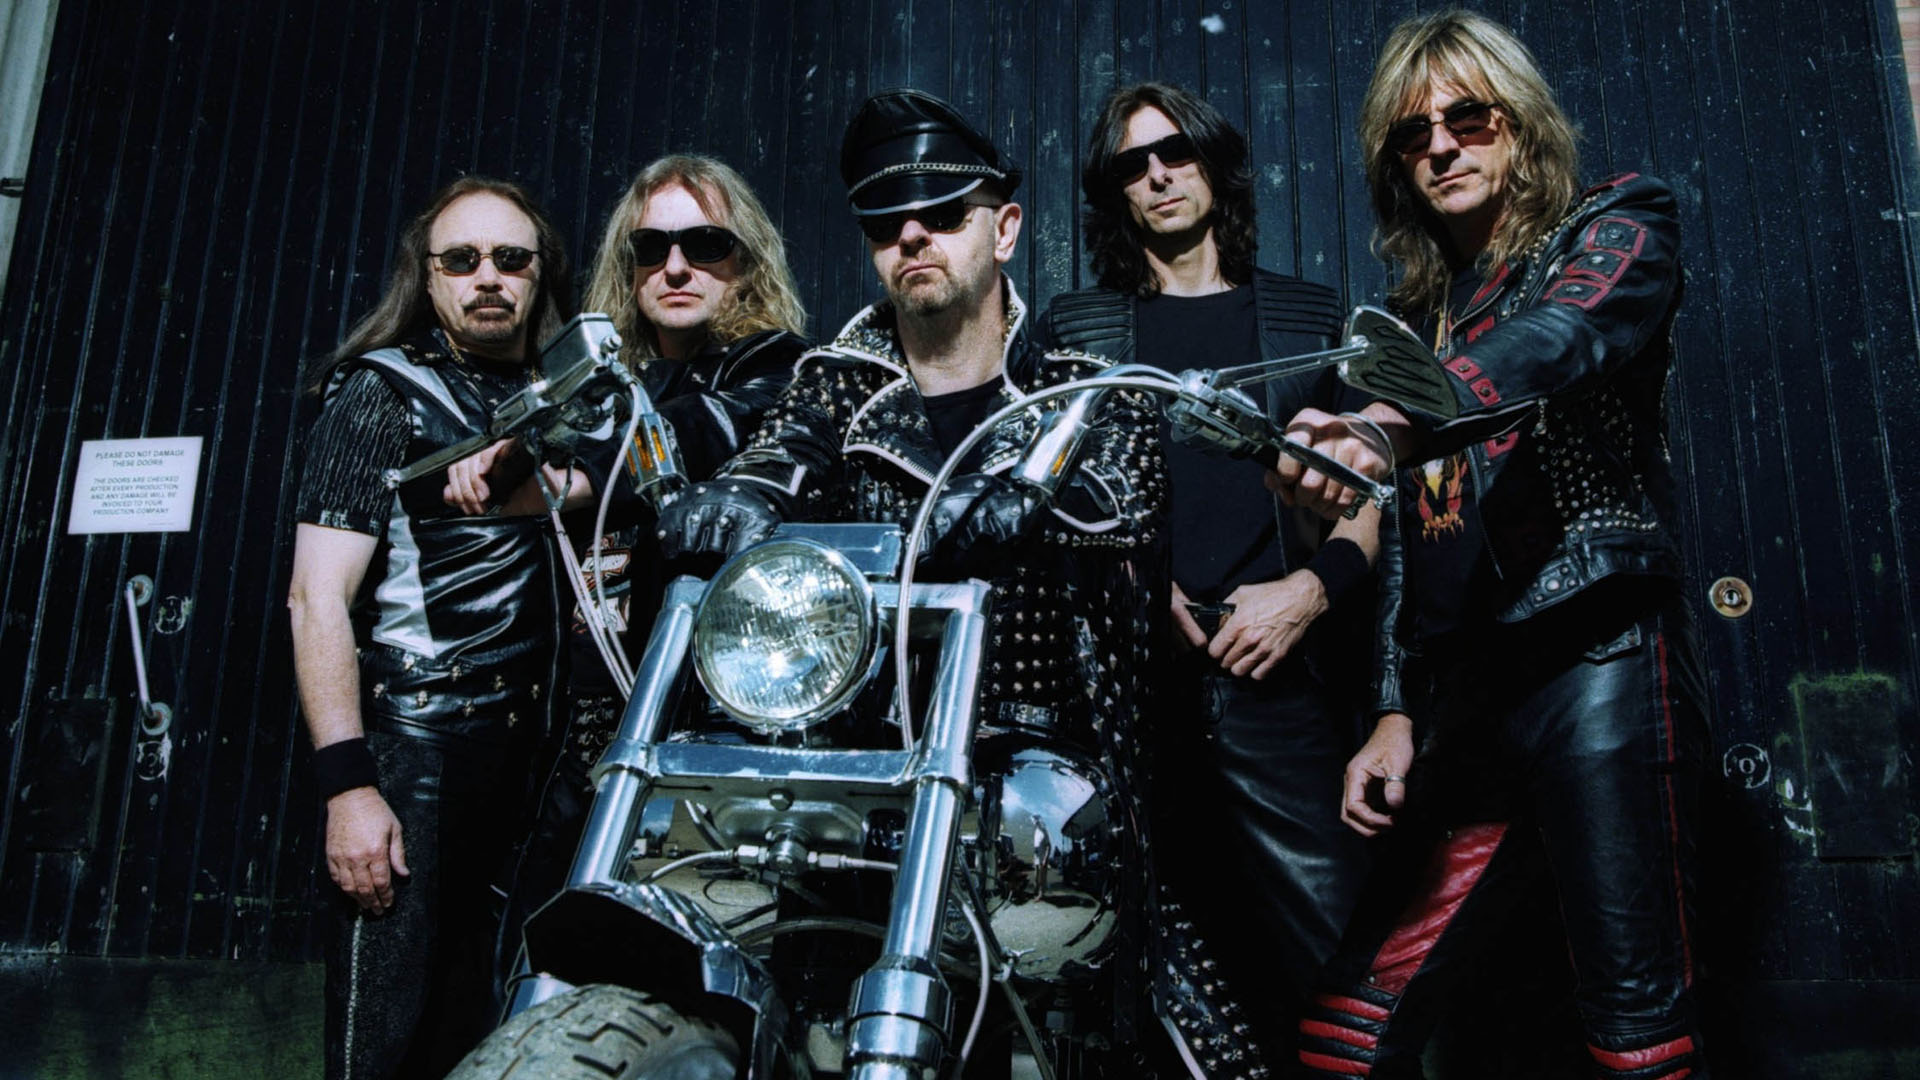 judas, Priest, Heavy, Metal, Groups, Bands, Entertainment, Music, Hard,  Rock, Album, Covers Wallpapers HD / Desktop and Mobile Backgrounds